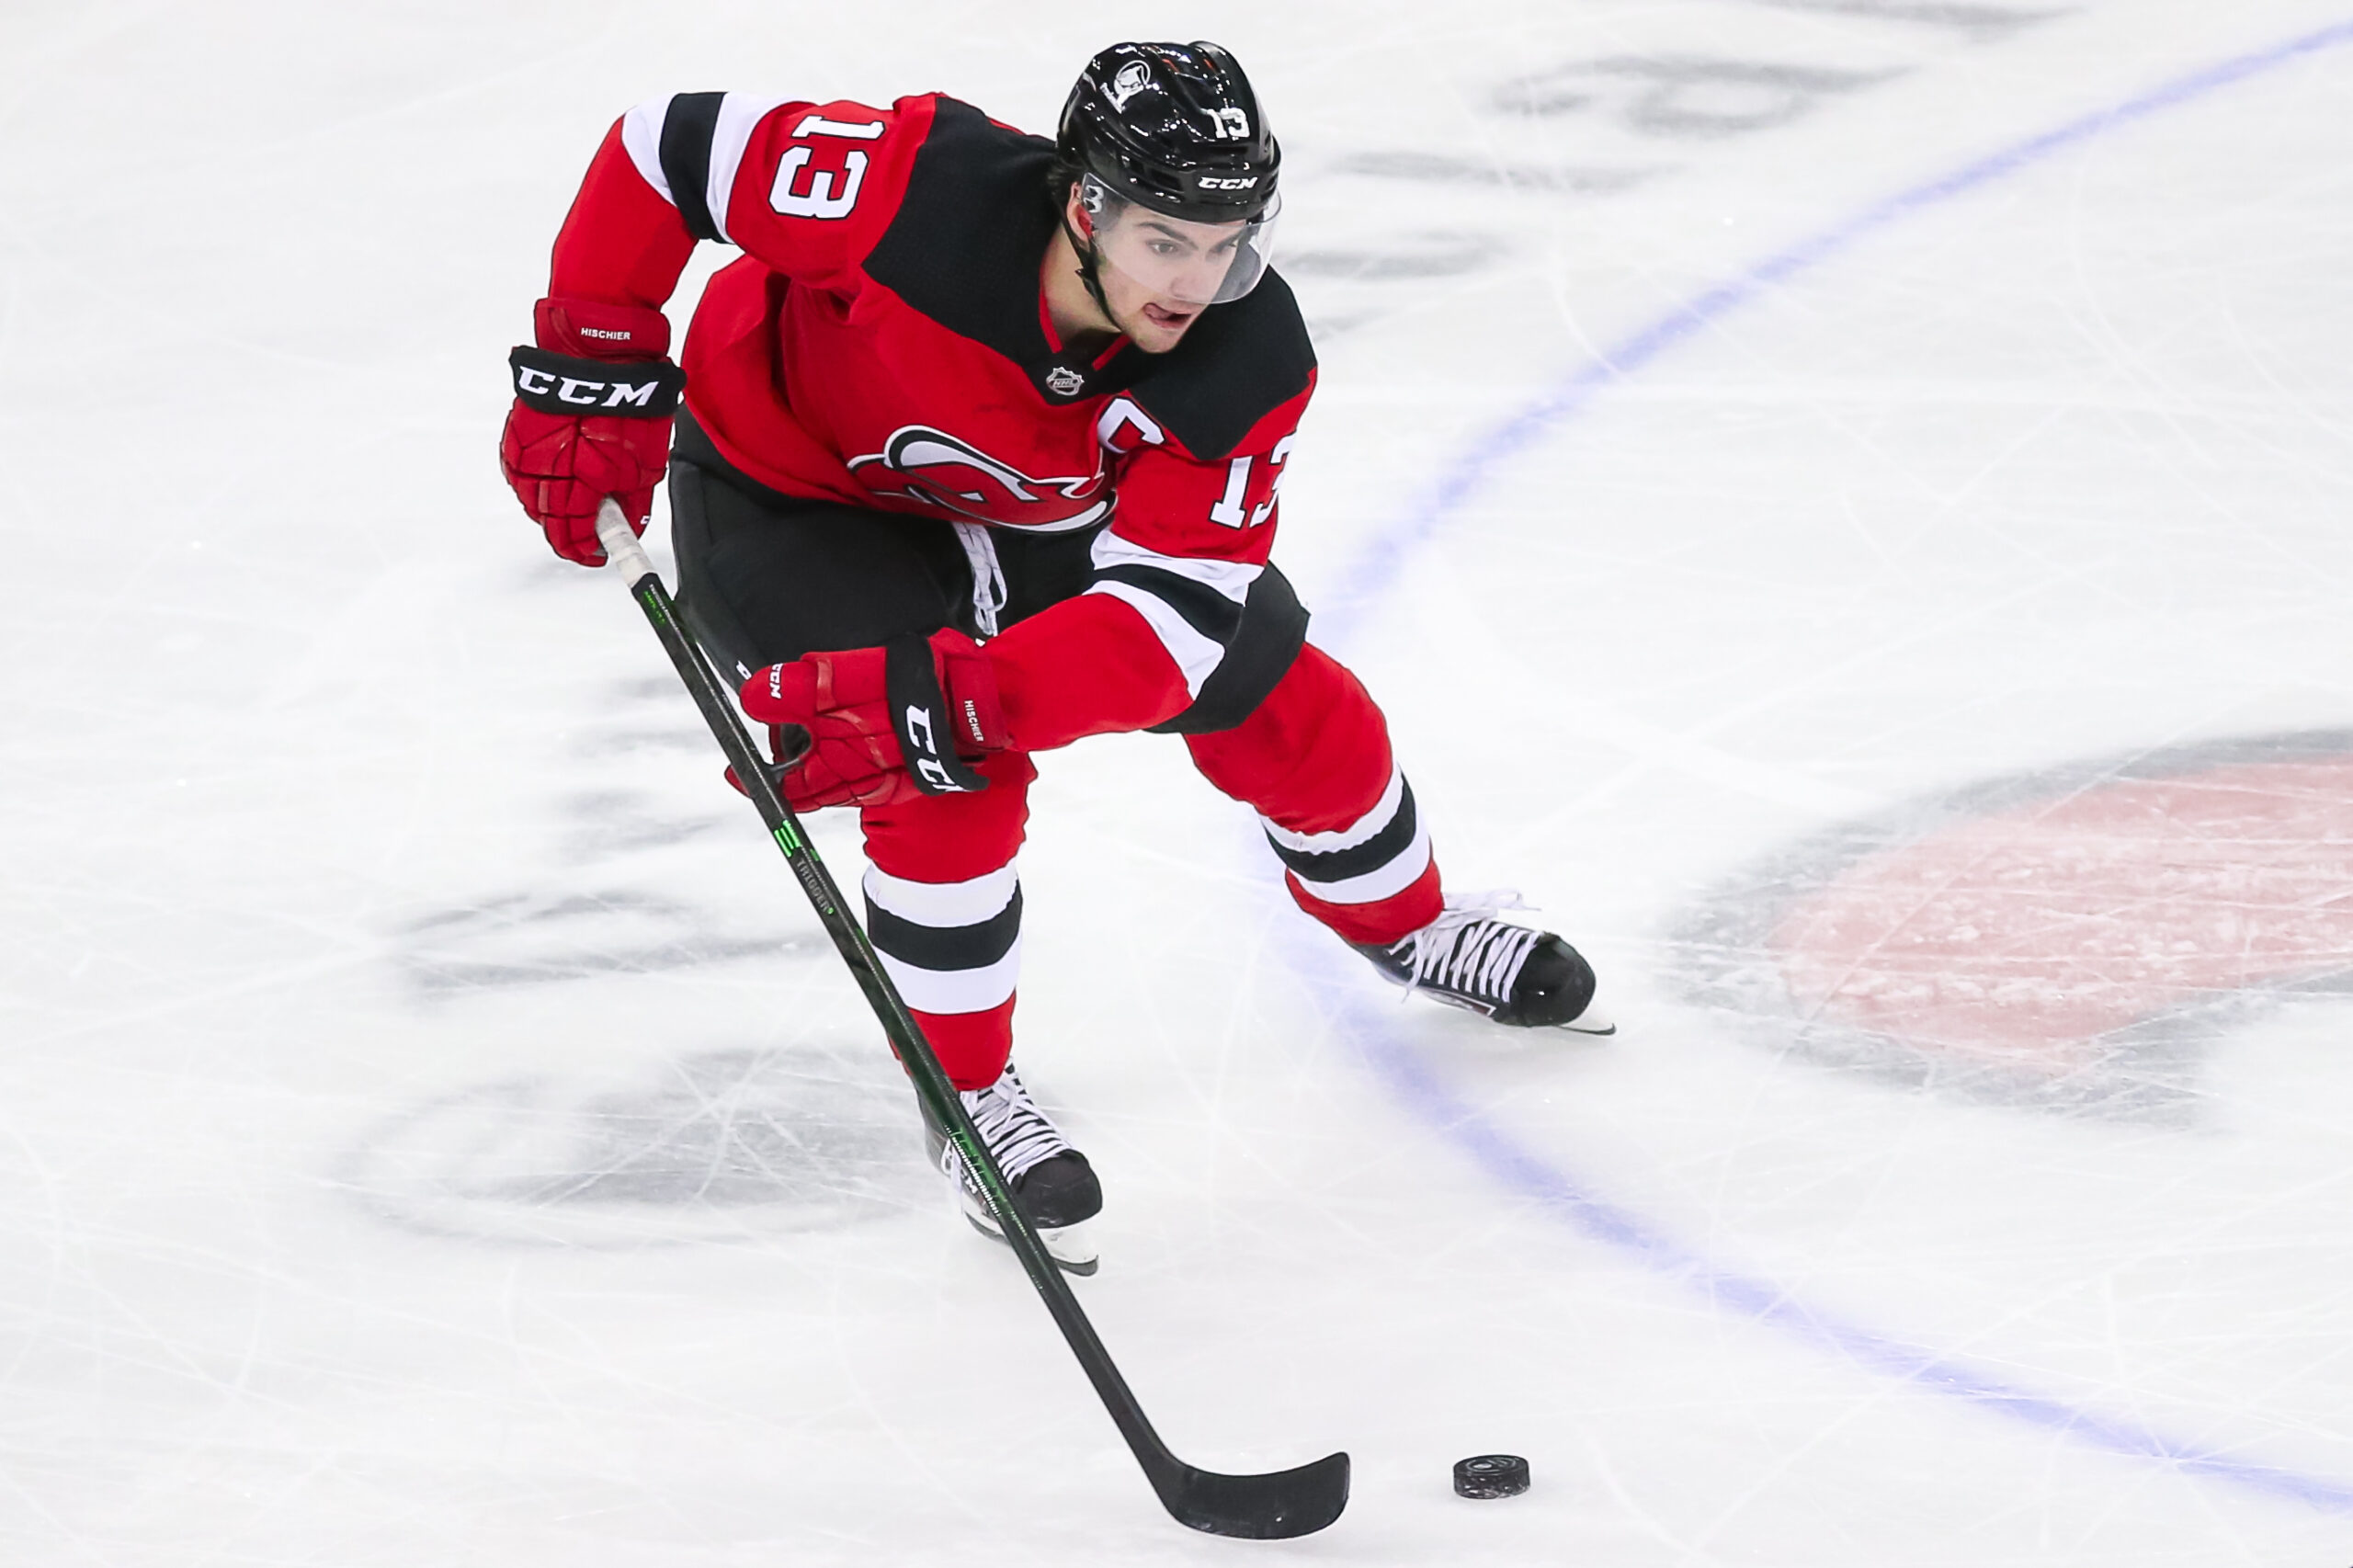 Appreciating the Choice of Nico Hischier as New Jersey Devils